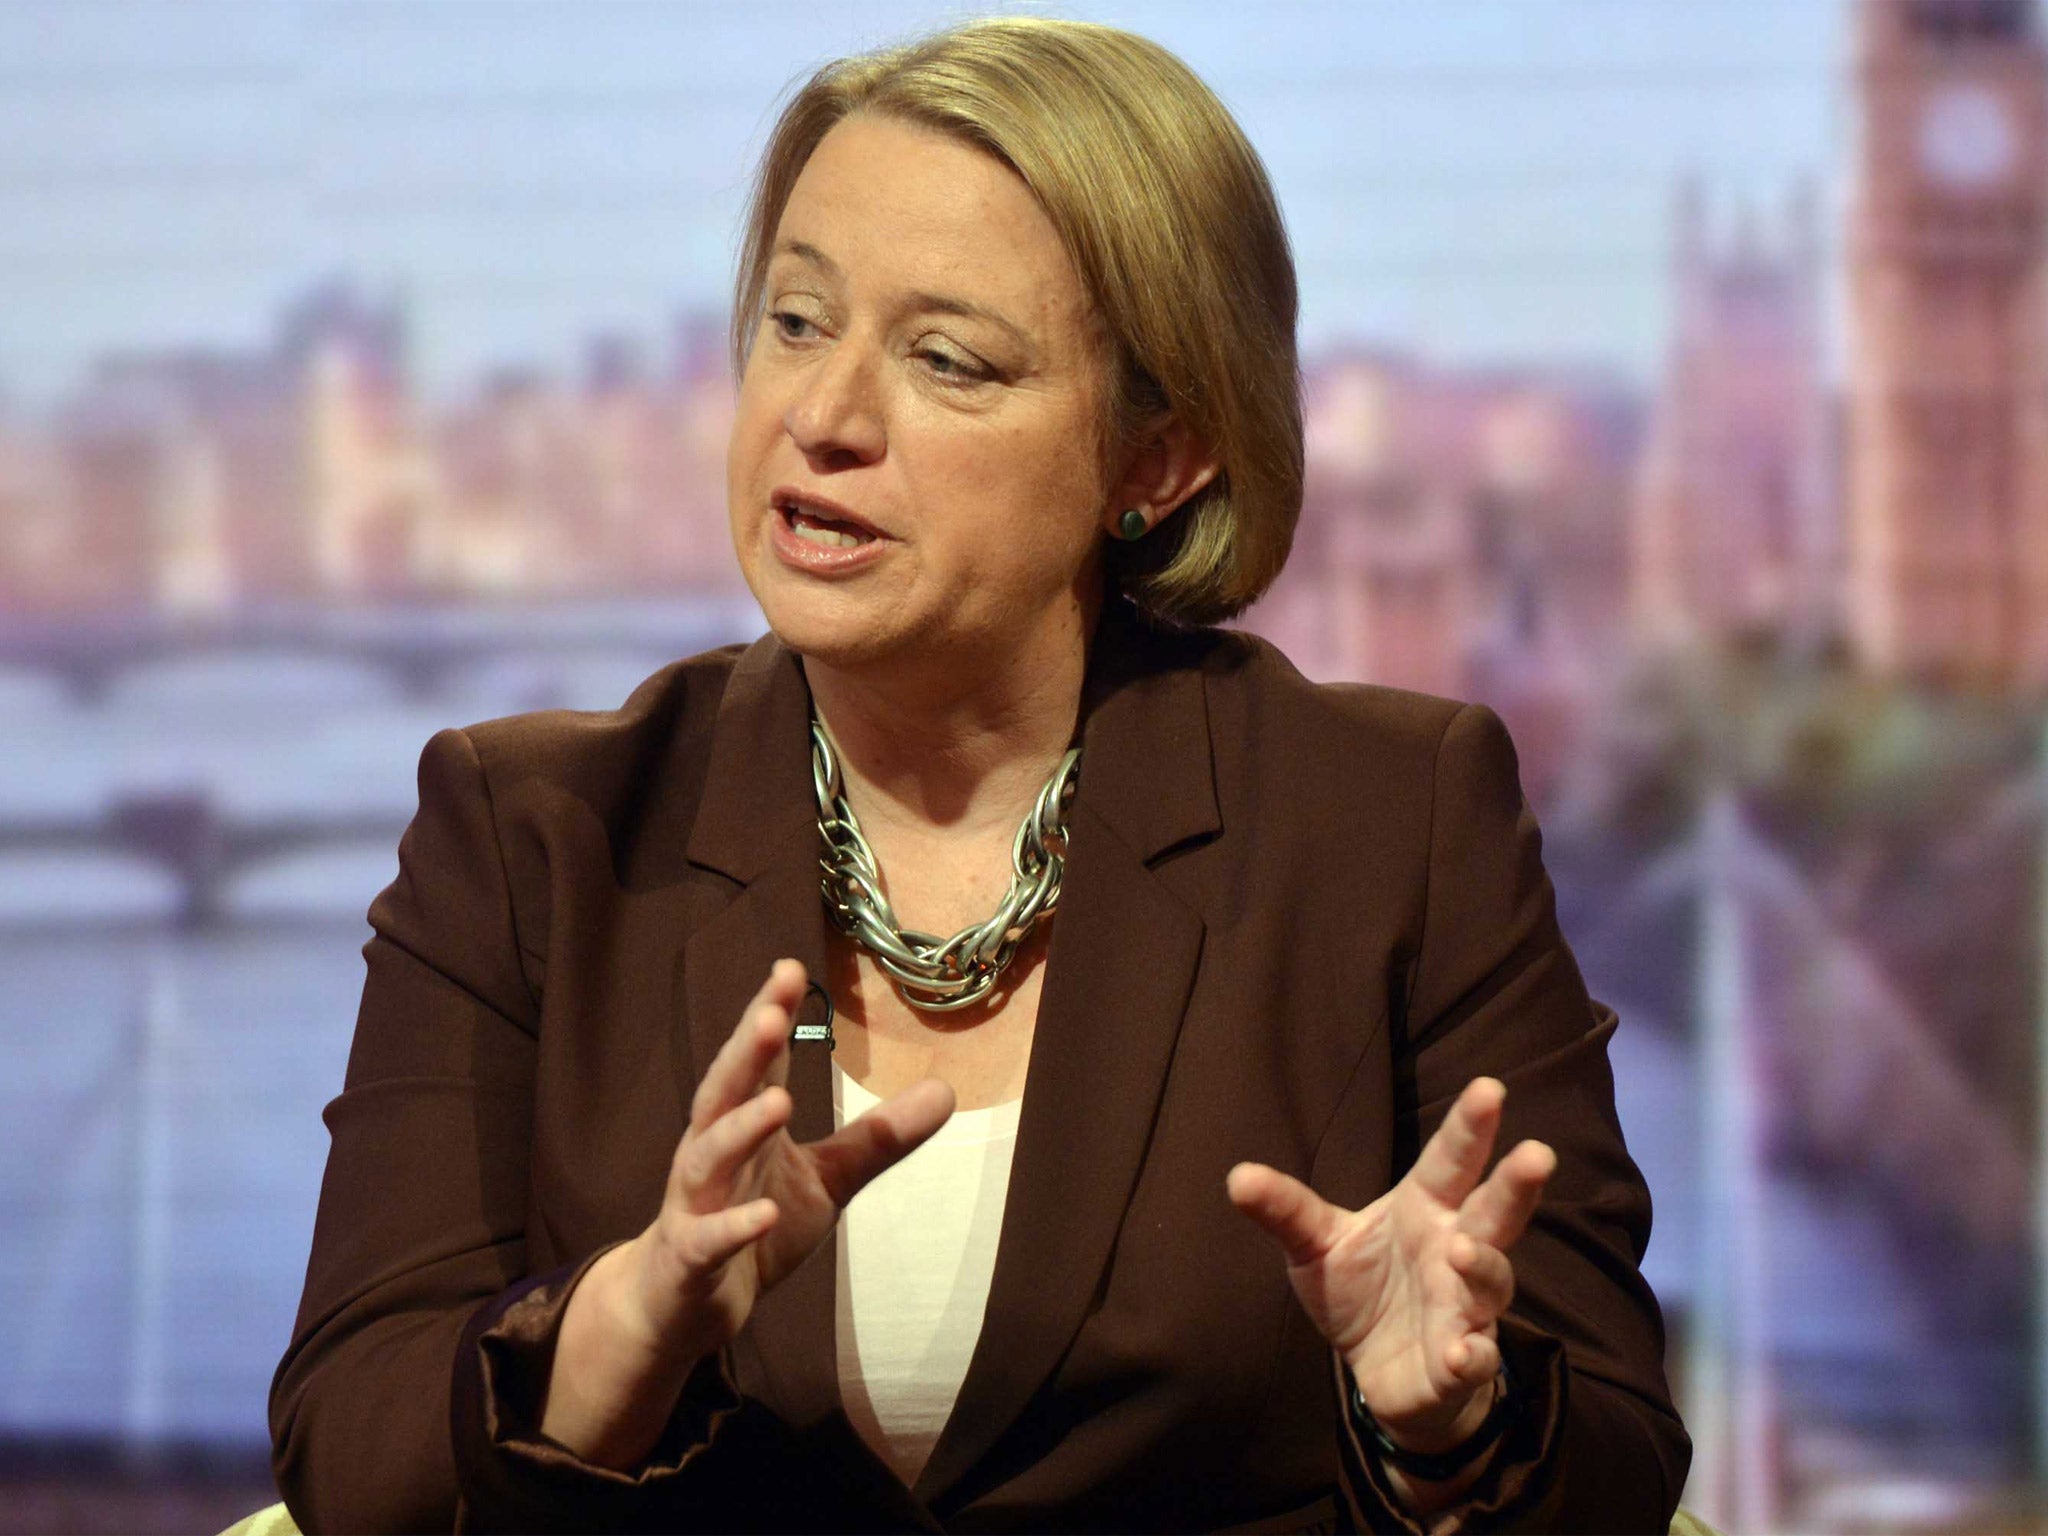 Natalie Bennett leader of the Green Party of England and Wales appears on the 'Andrew Marr Show' last month